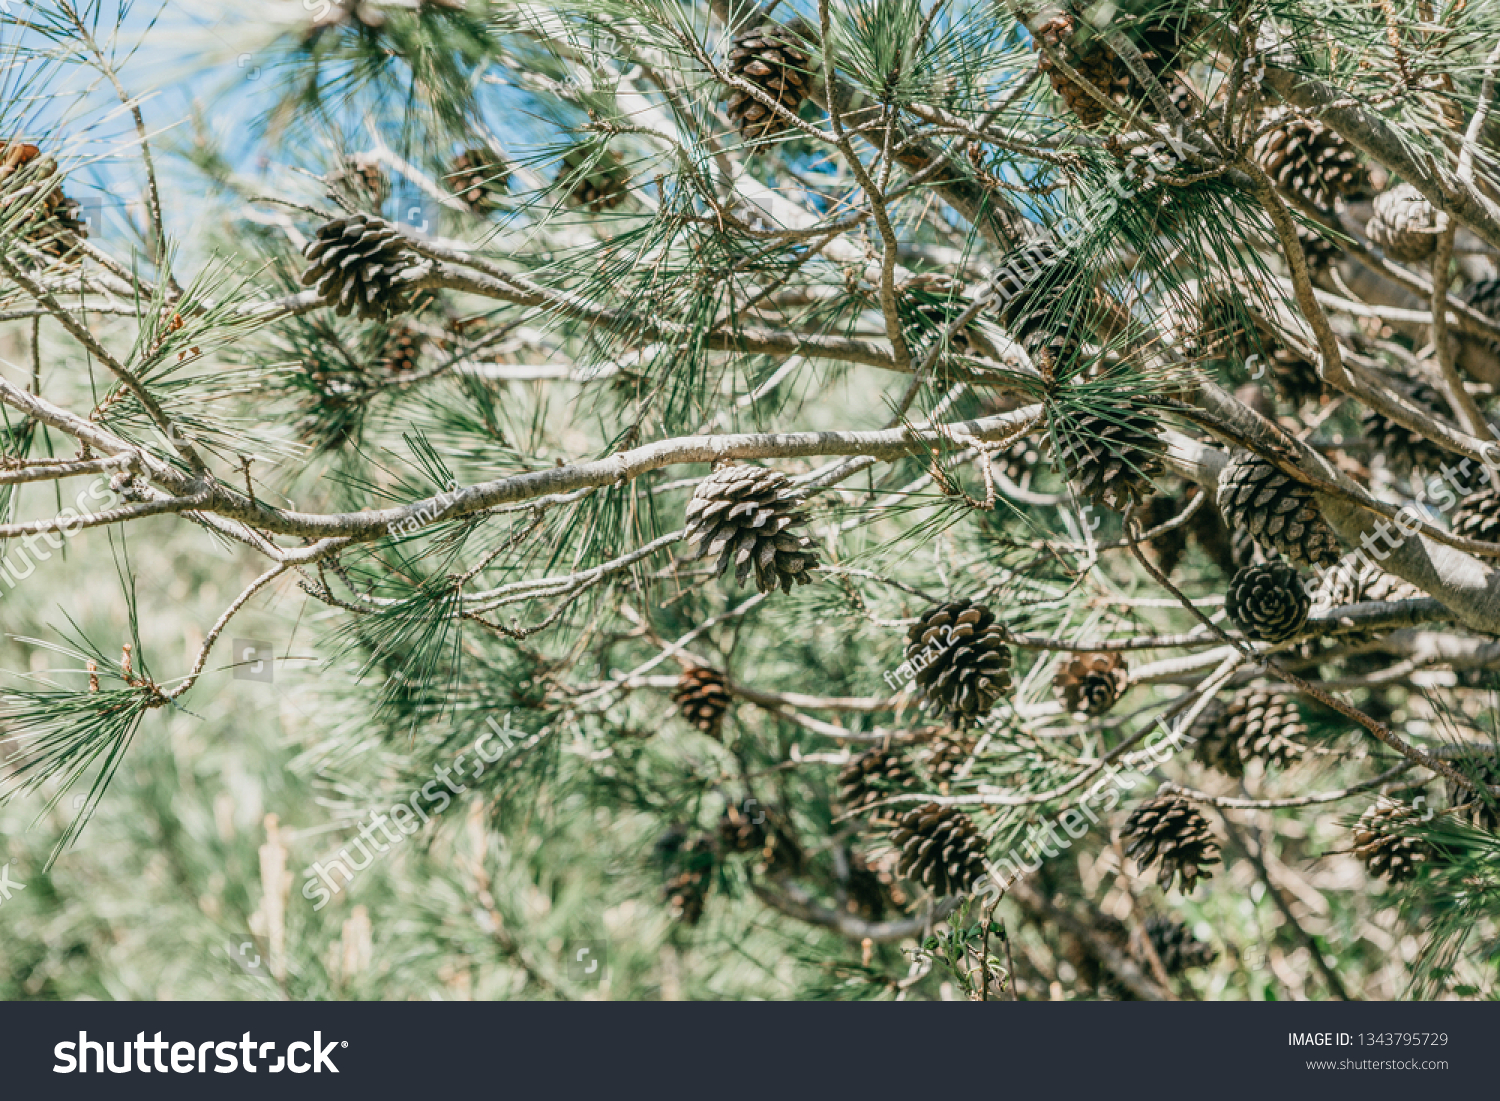 Fir or fir branches with cones in the forest on a sunny day. #1343795729